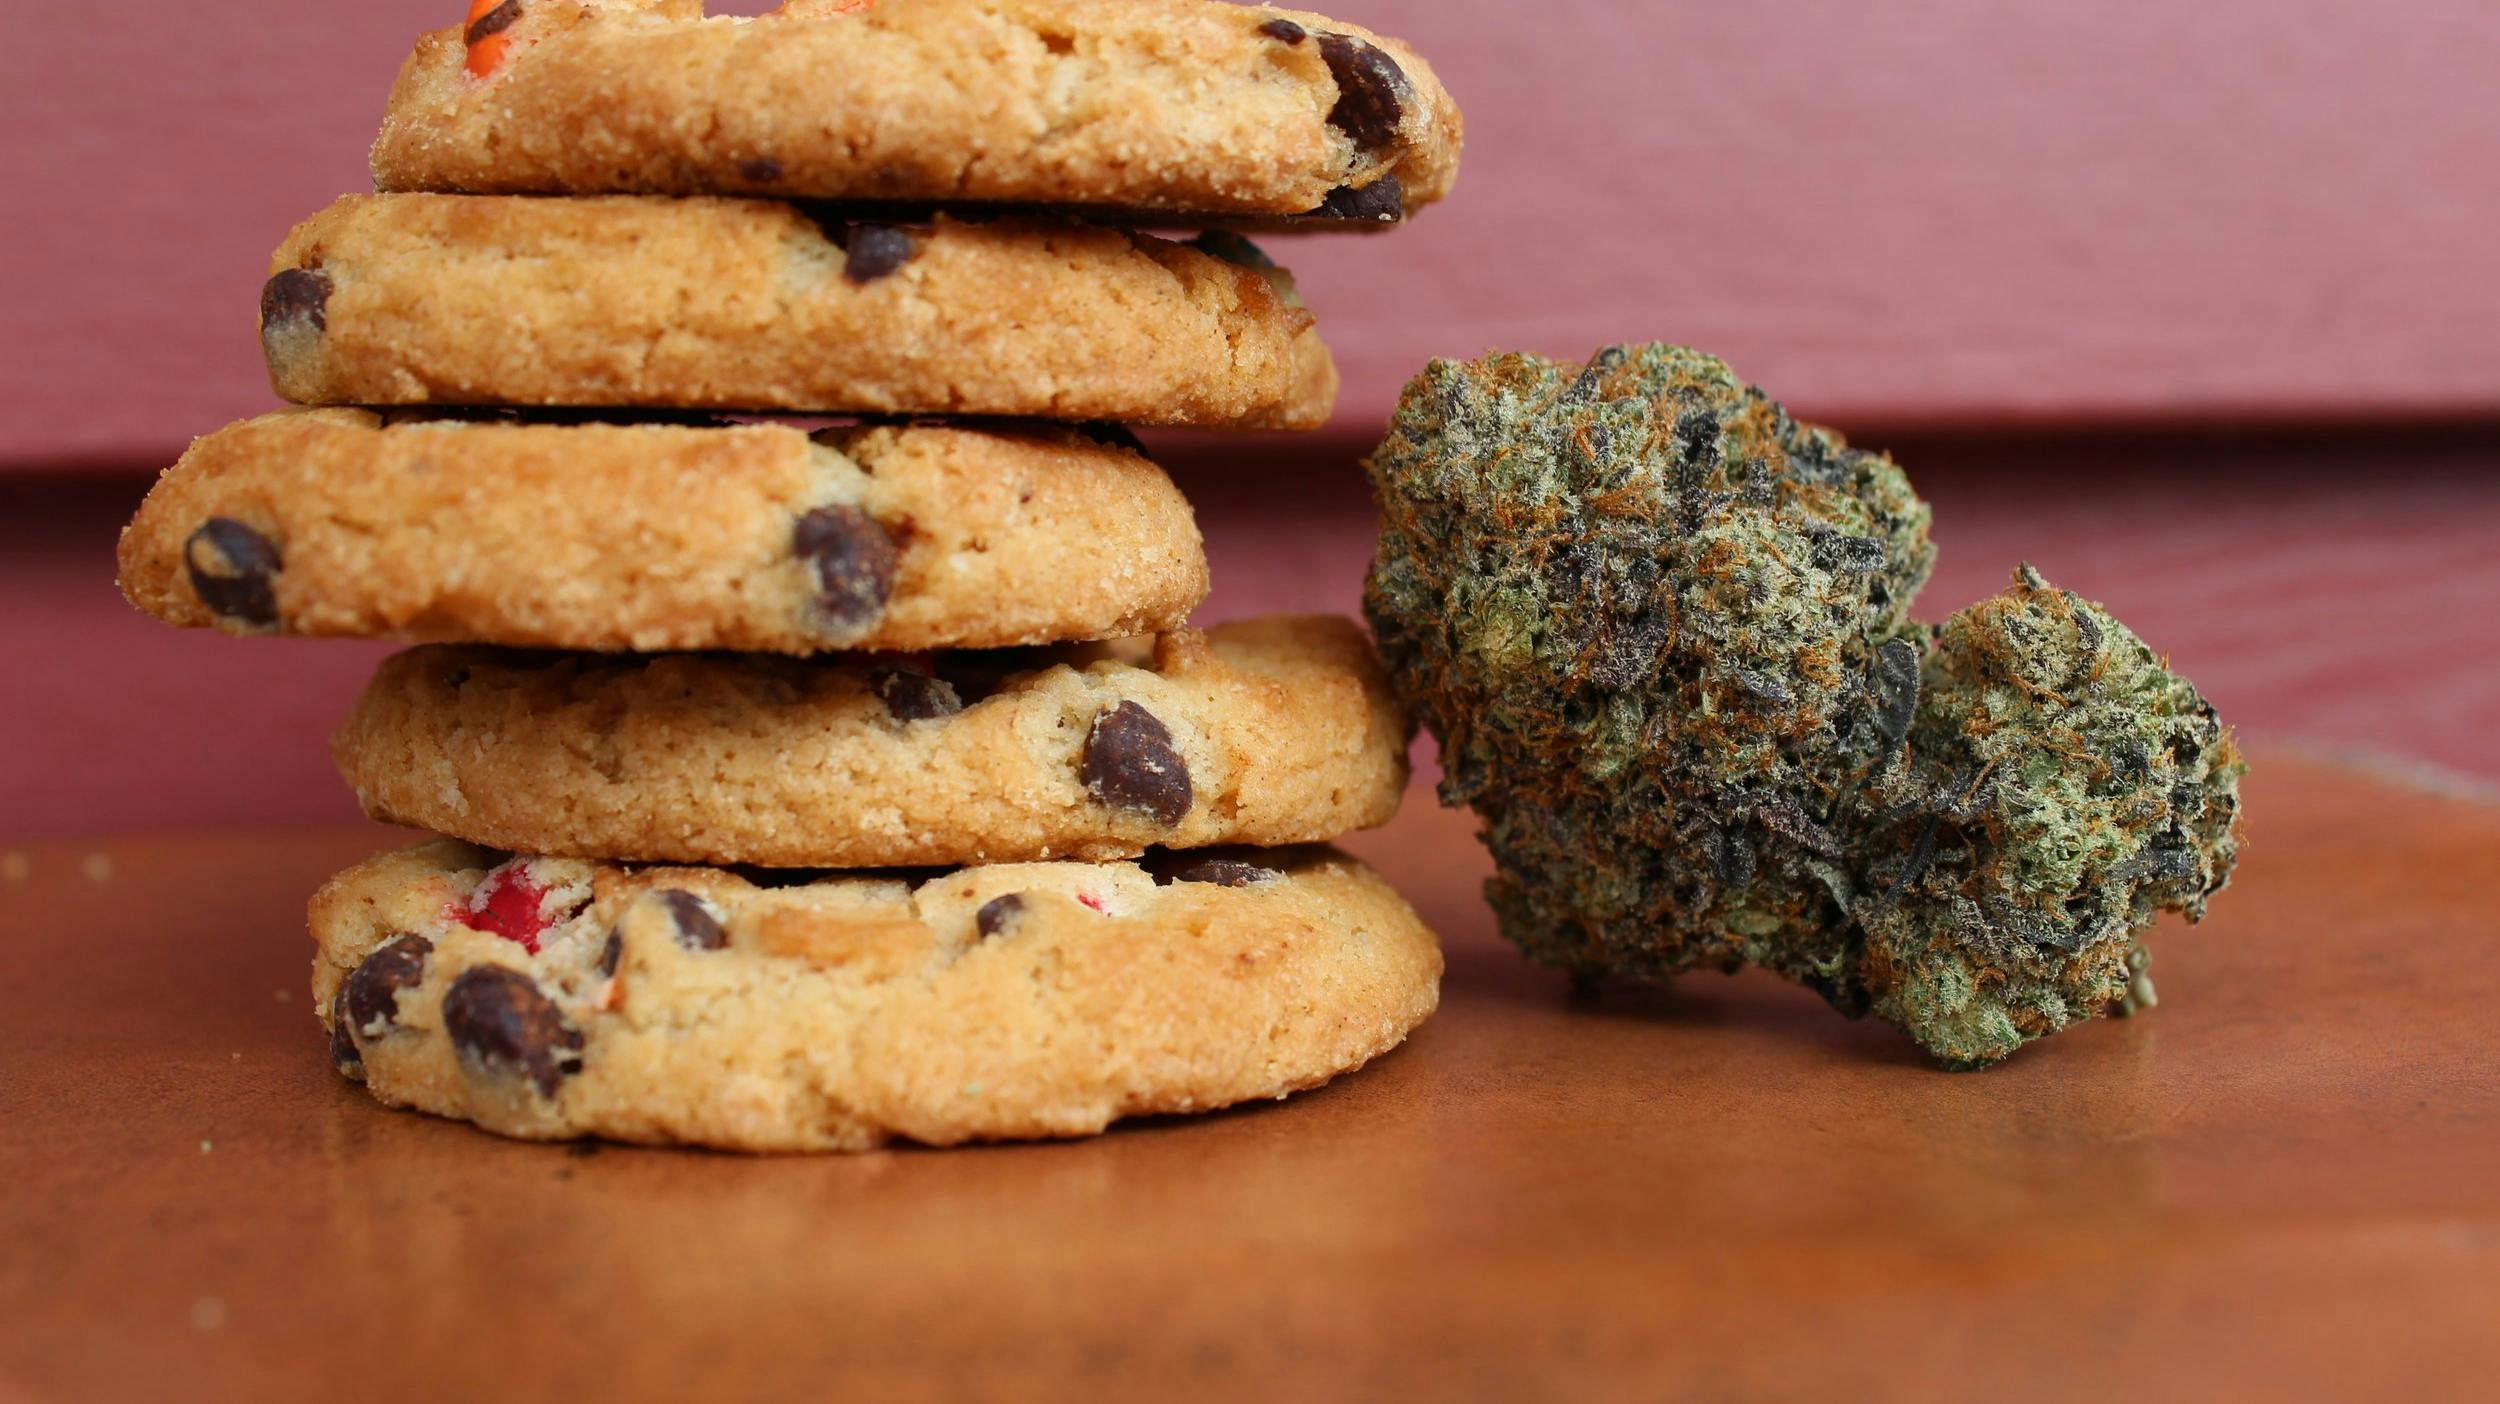 Stack of chocolate chip cookies next to a cannabis nug.